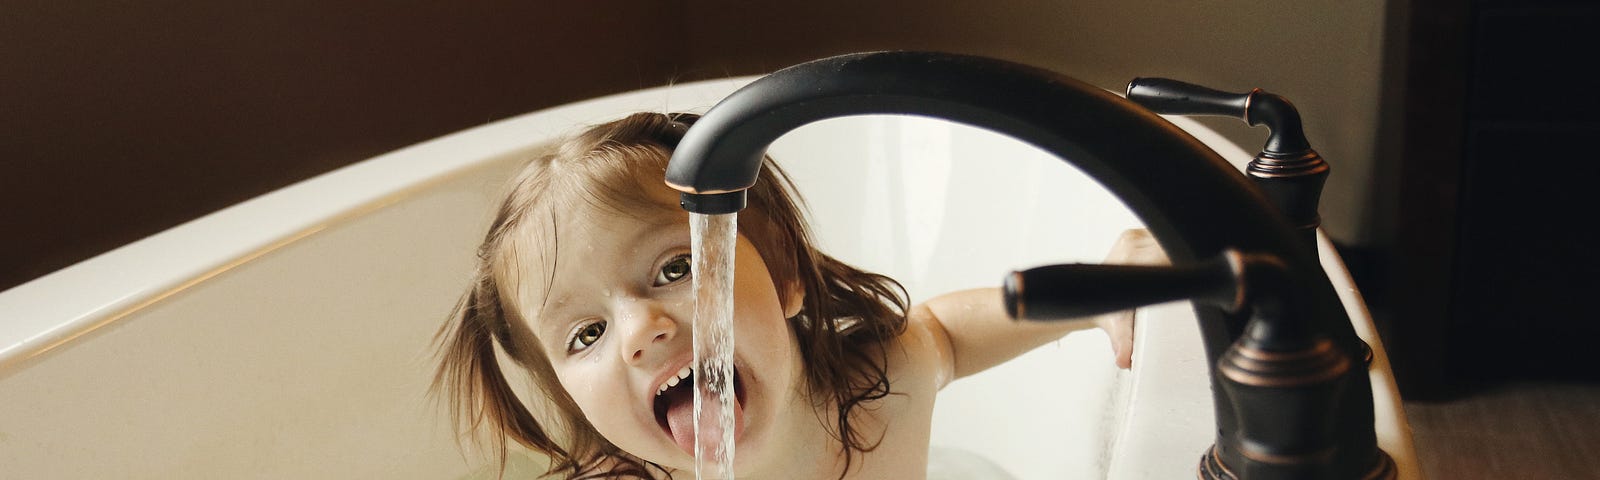 A young girl in a tub, trying to drink water from the faucet